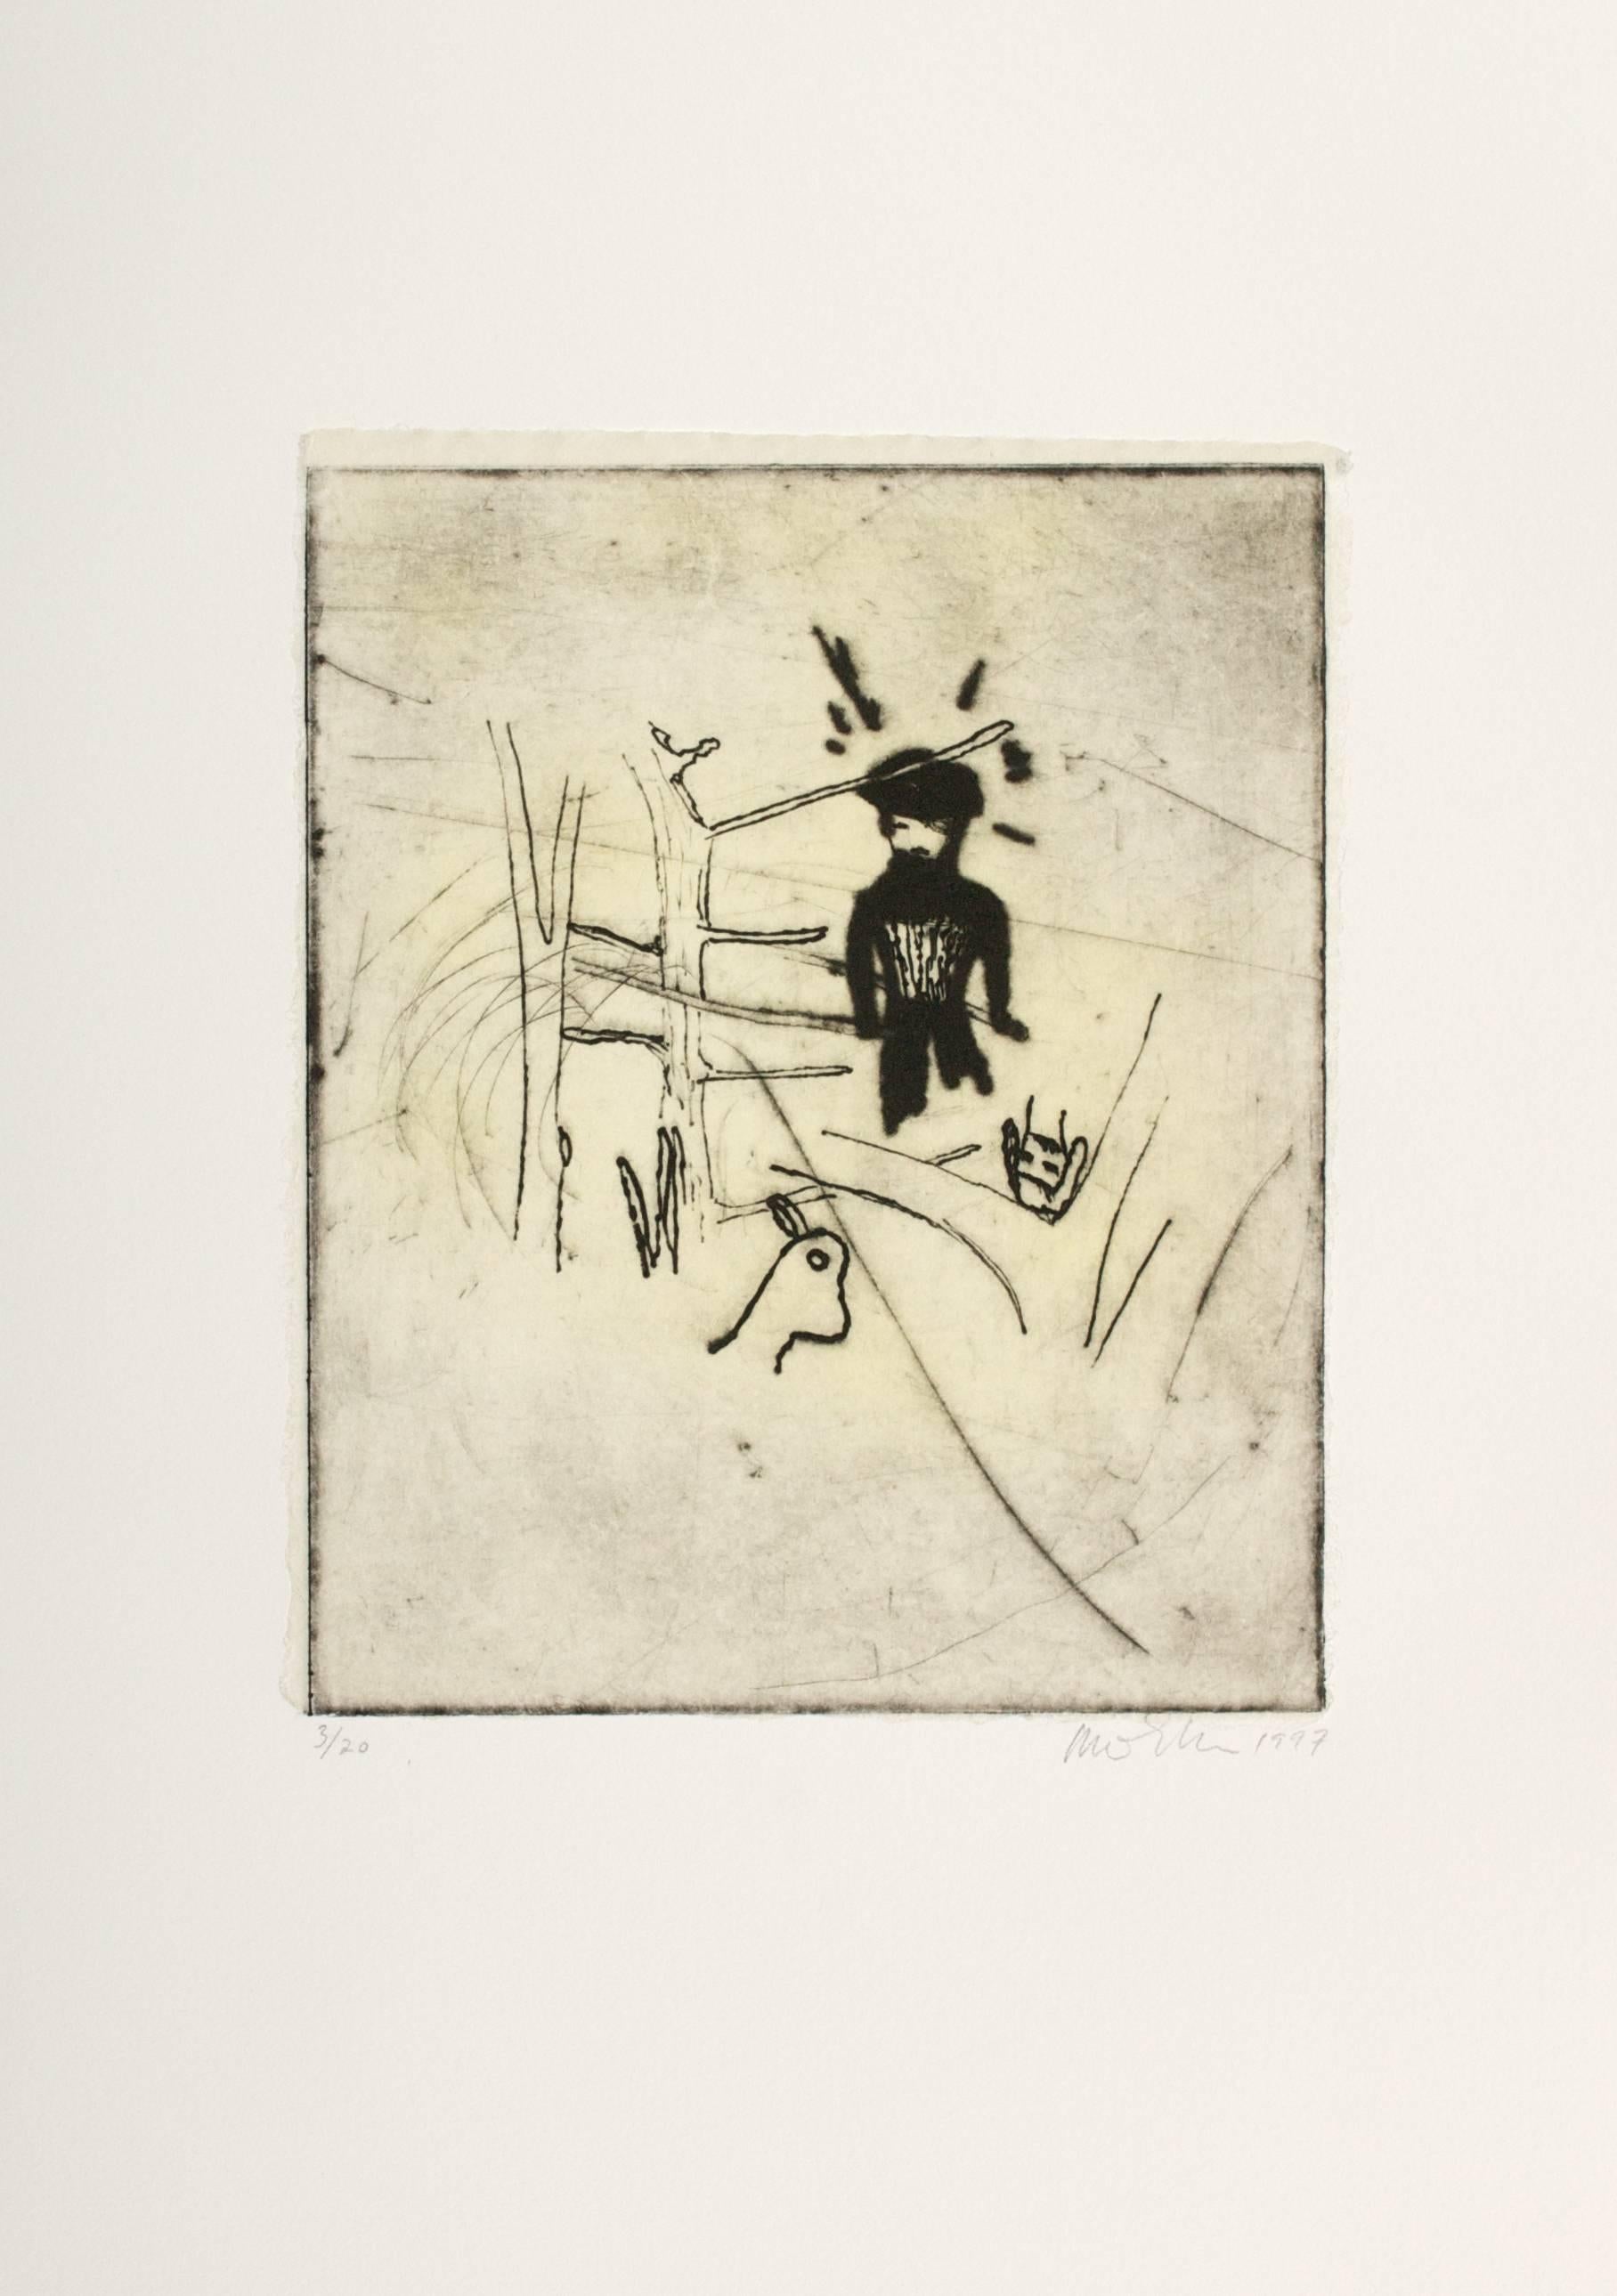 Untitled Etching / Suite of 4 - Print by Martin Mull